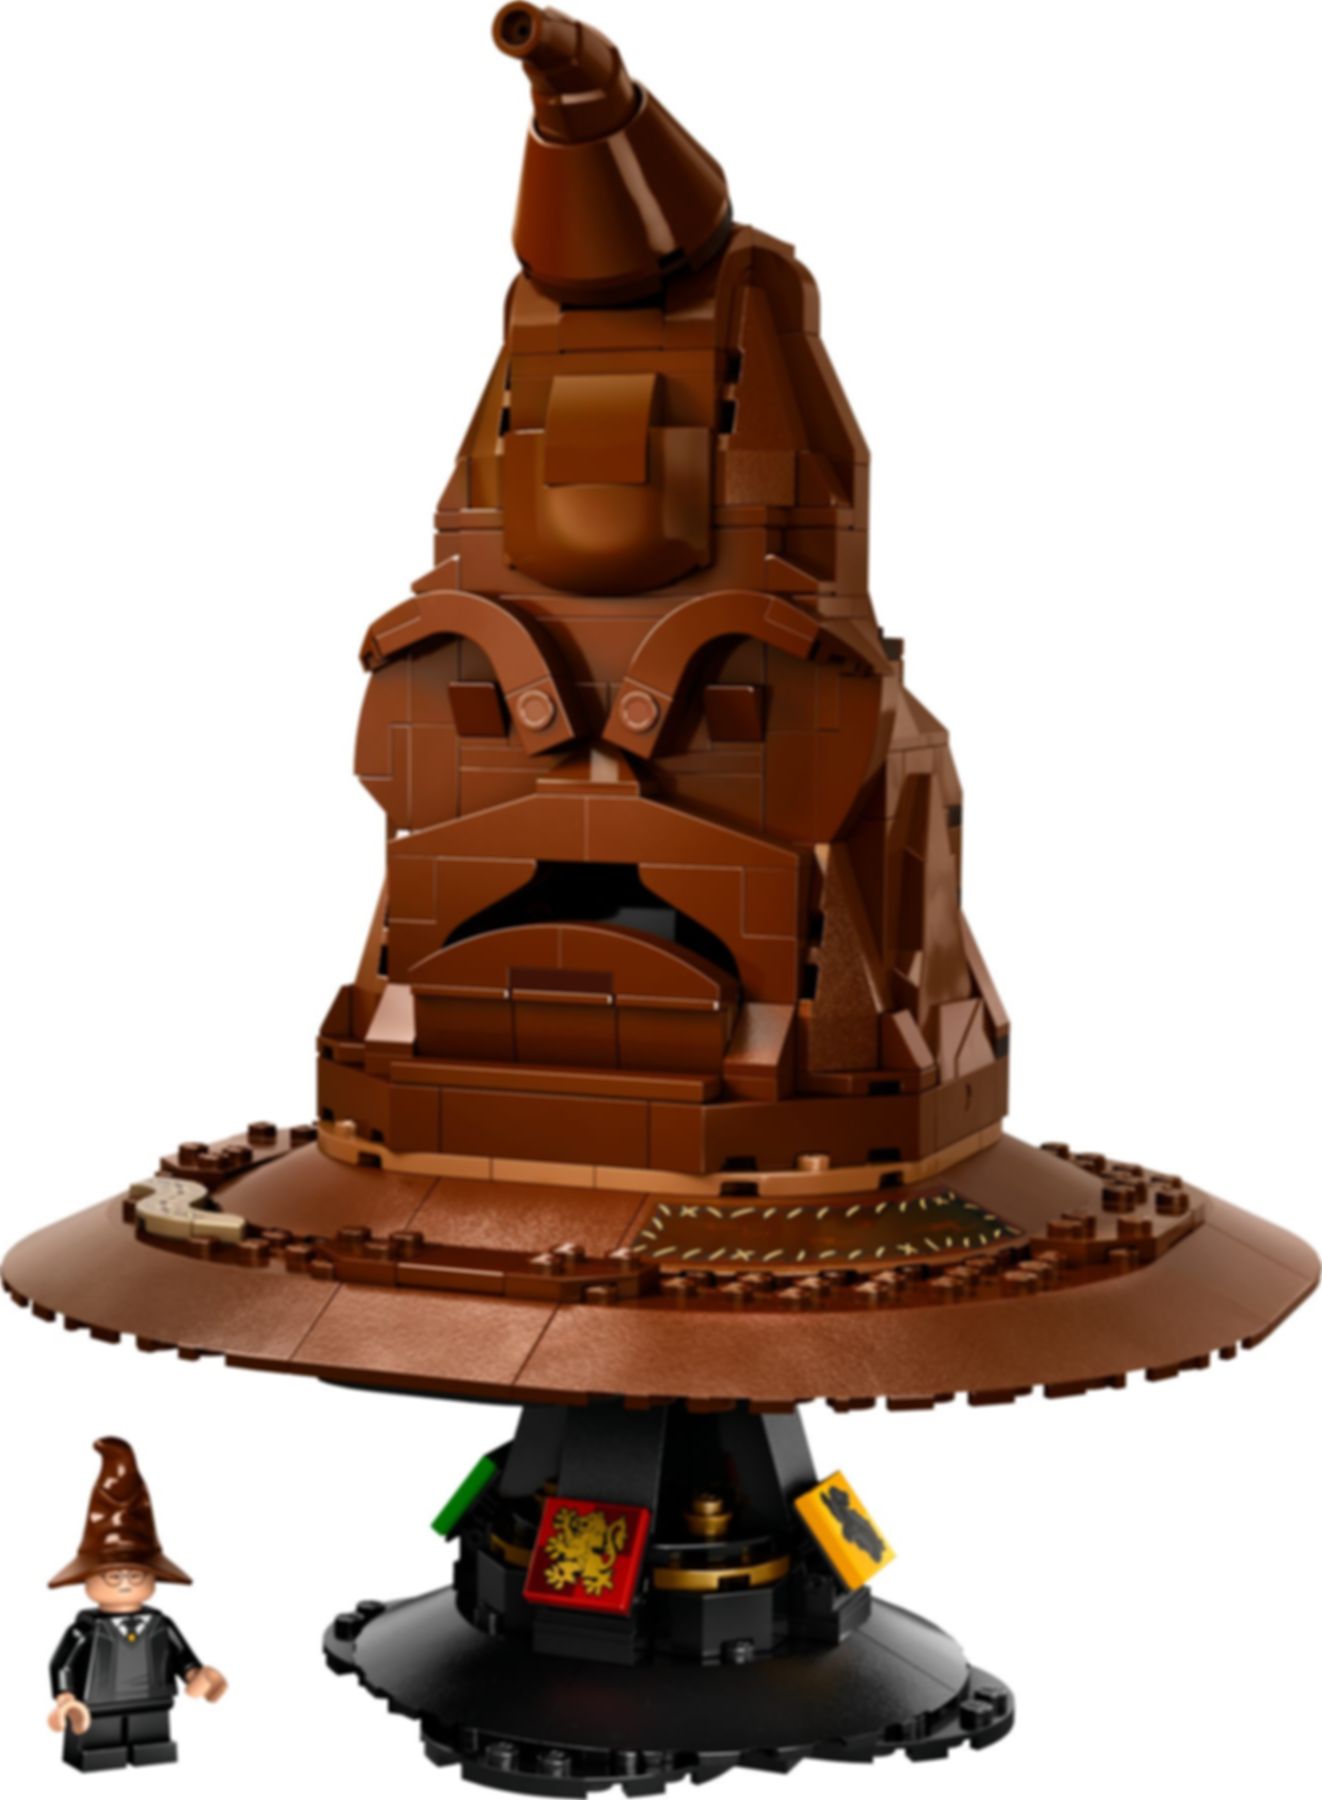 LEGO® Harry Potter™ Talking Sorting Hat components